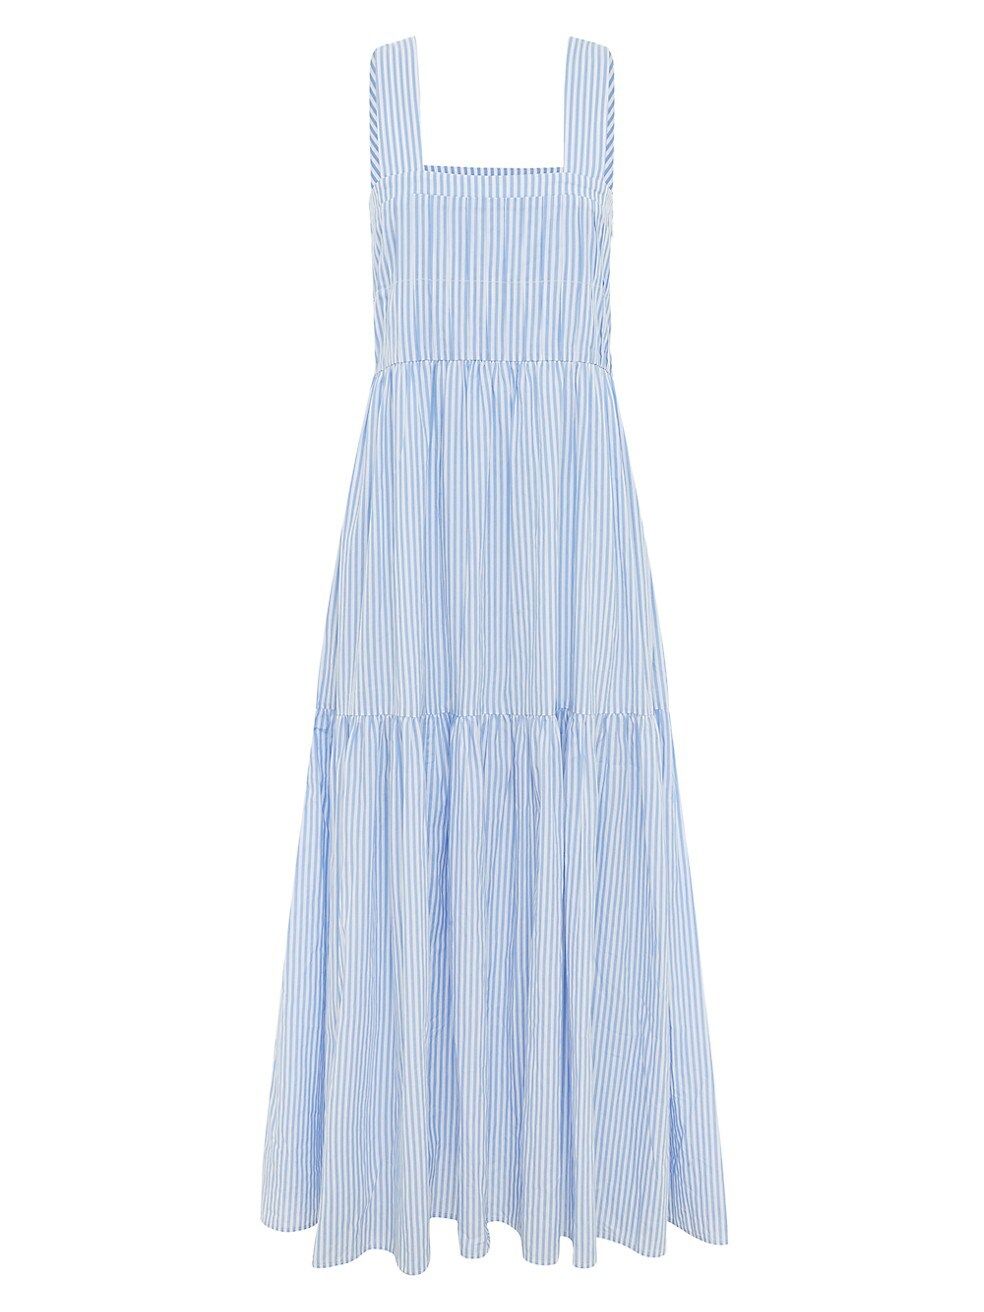 BIRD & KNOLL Penelope Striped Cotton Voile Tiered Maxi | Saks Fifth Avenue